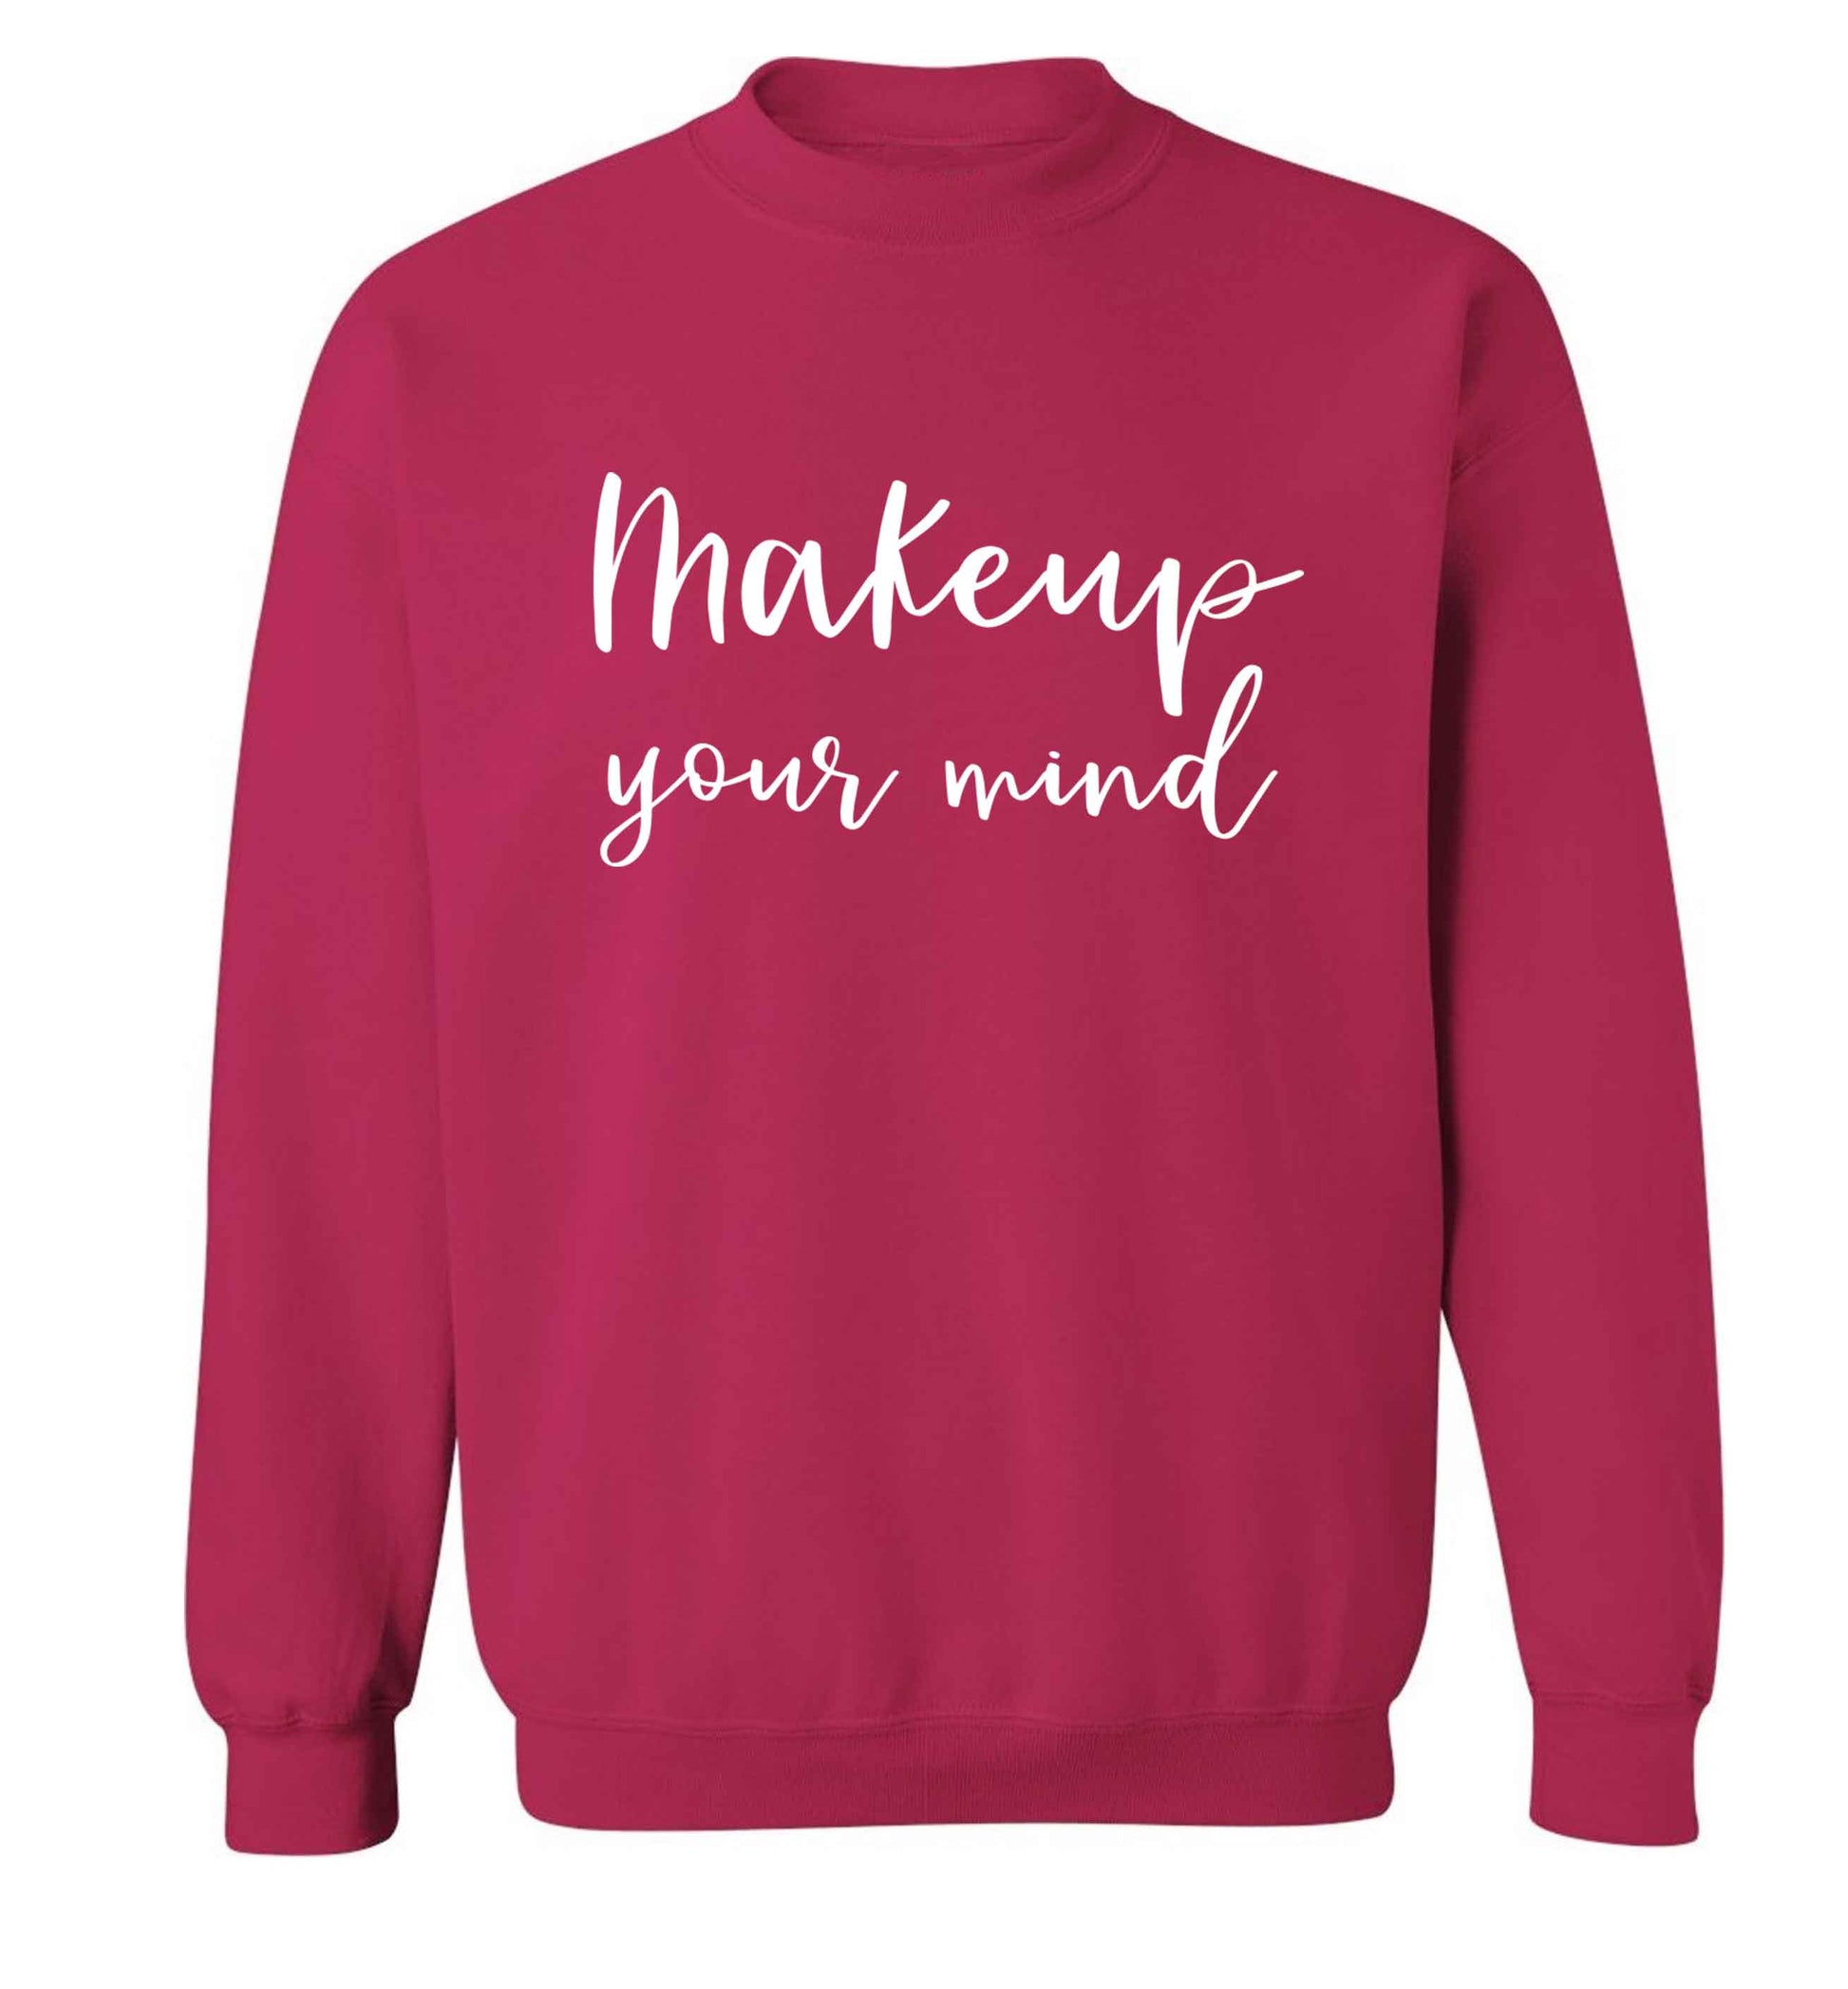 Makeup your mind Adult's unisex pink Sweater 2XL